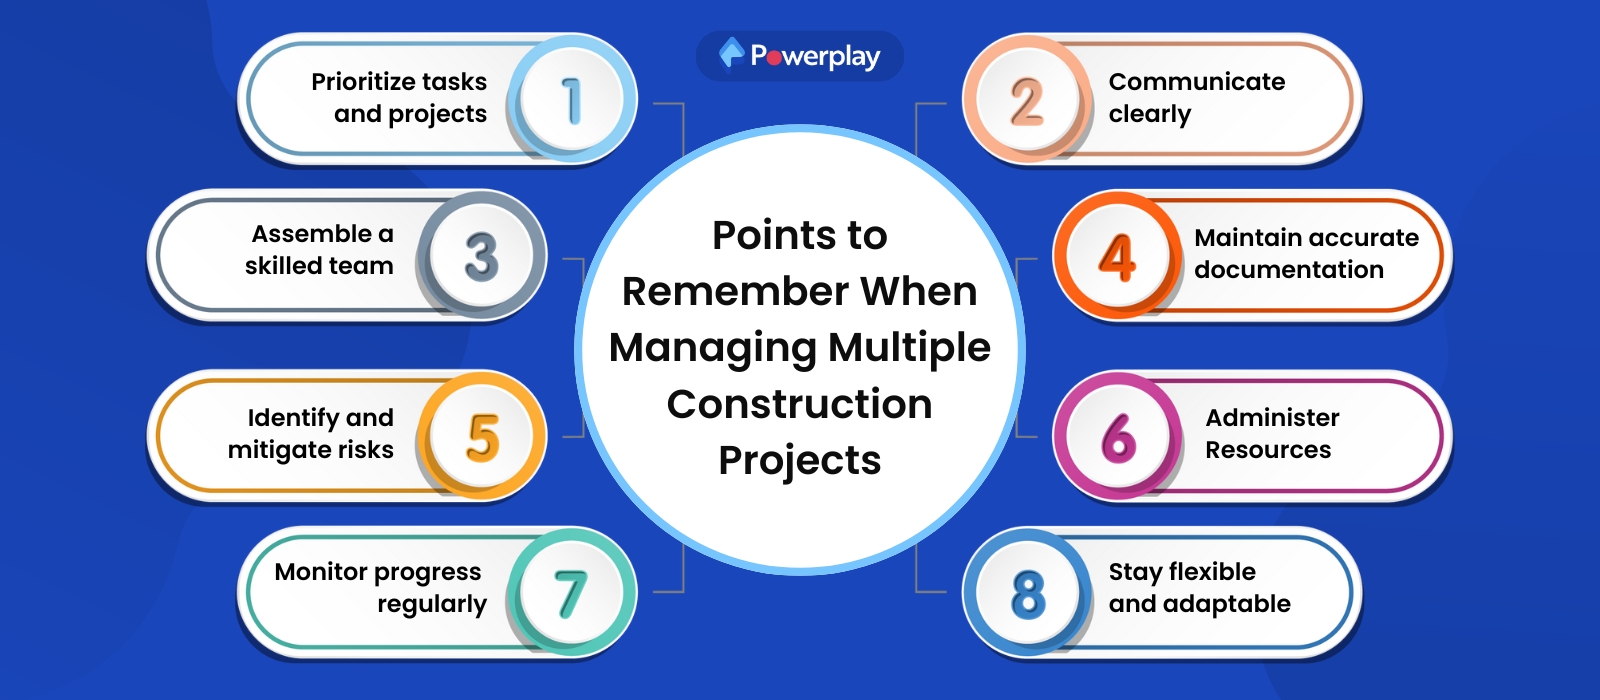 Managing Multiple Construction Projects
